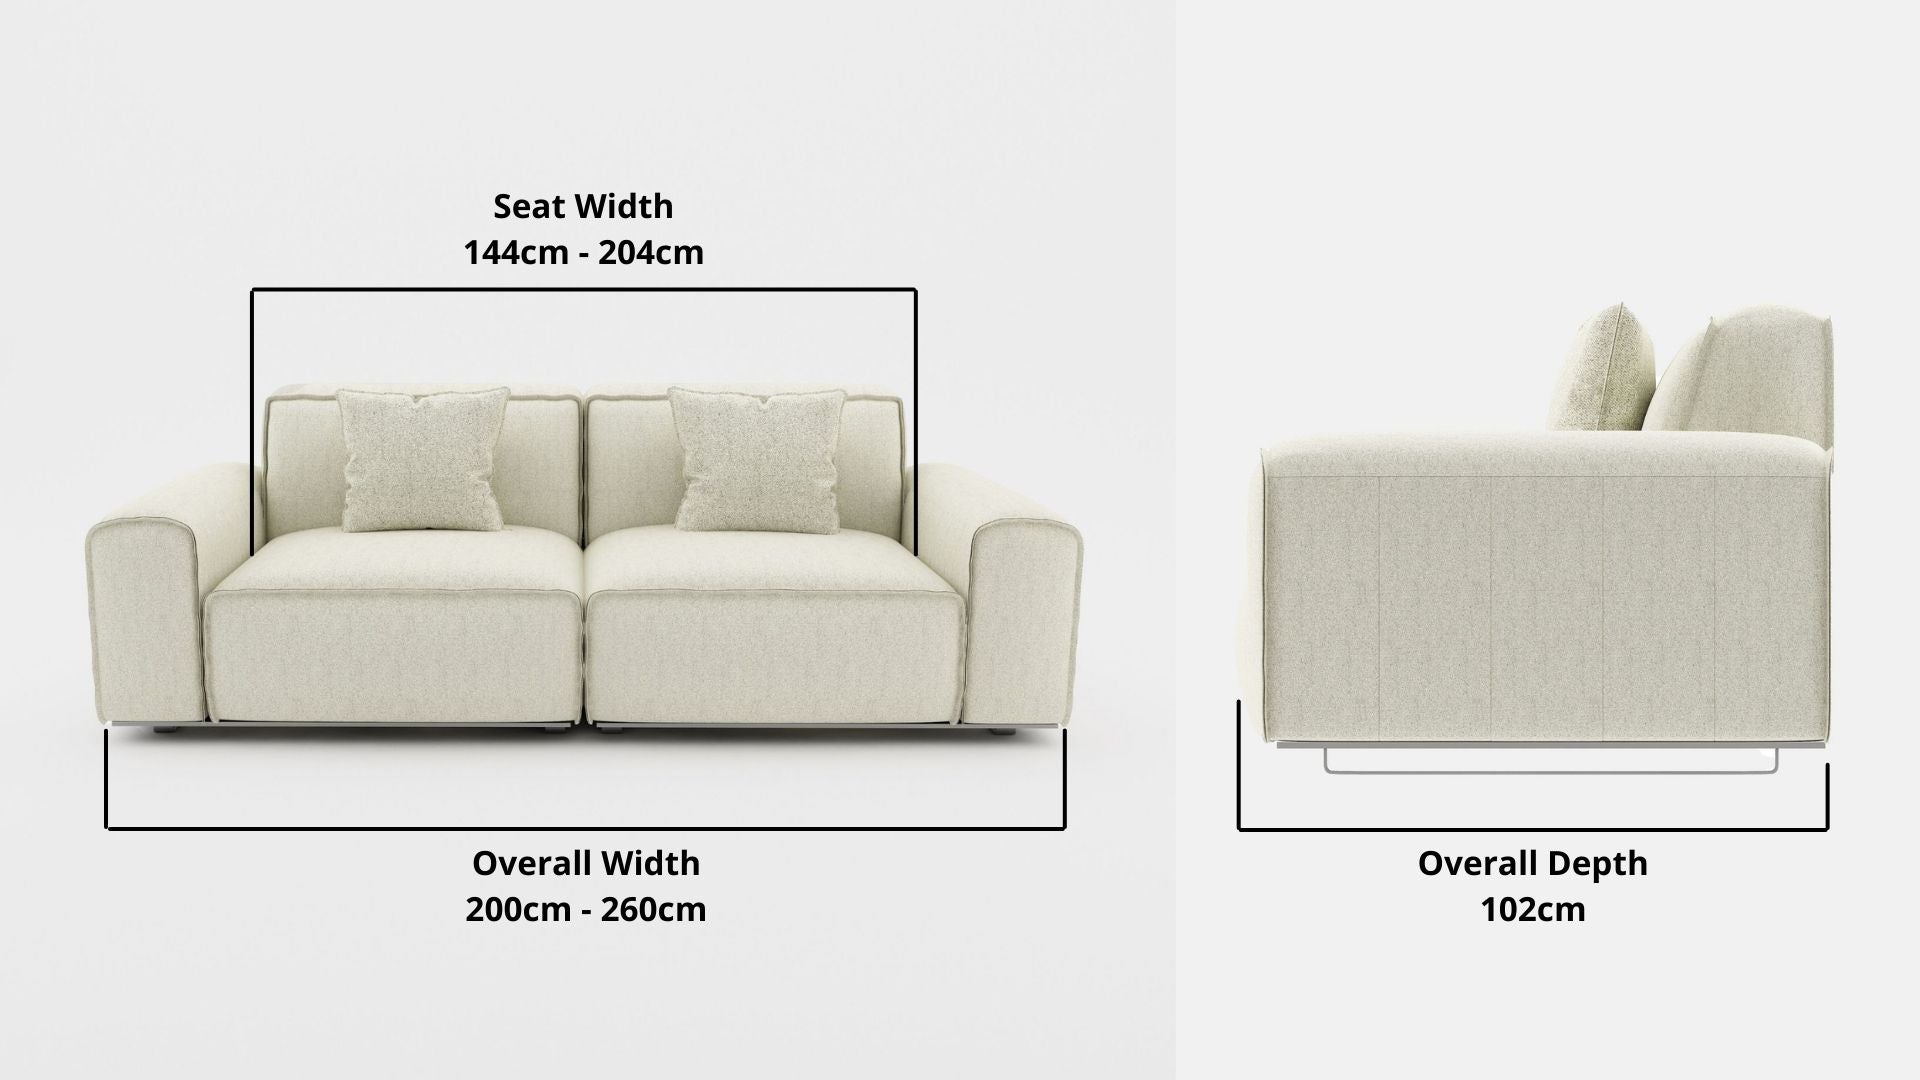 Details the key dimensions in terms of overall width, overall depth and seat width for Colby Fabric Sofa